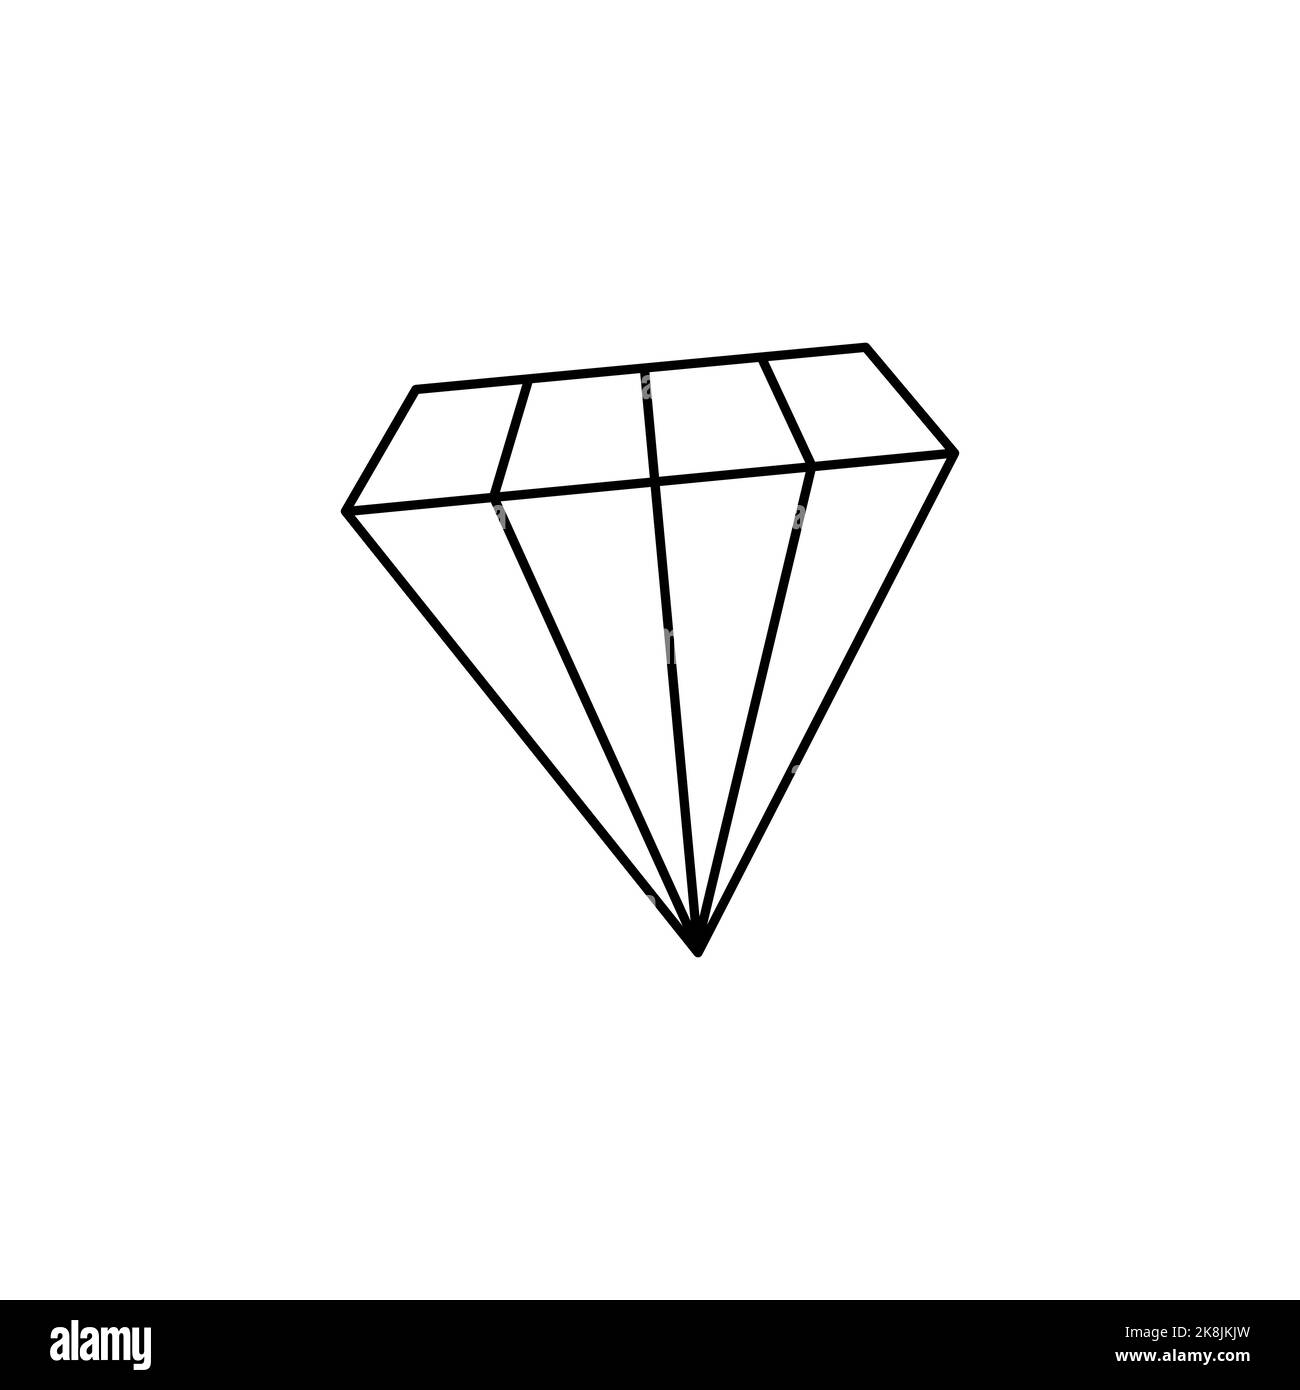 Cute diamond isolated on white background. Vector hand-drawn illustration in doodle style. Perfect for decorations, logo, various designs. Stock Vector